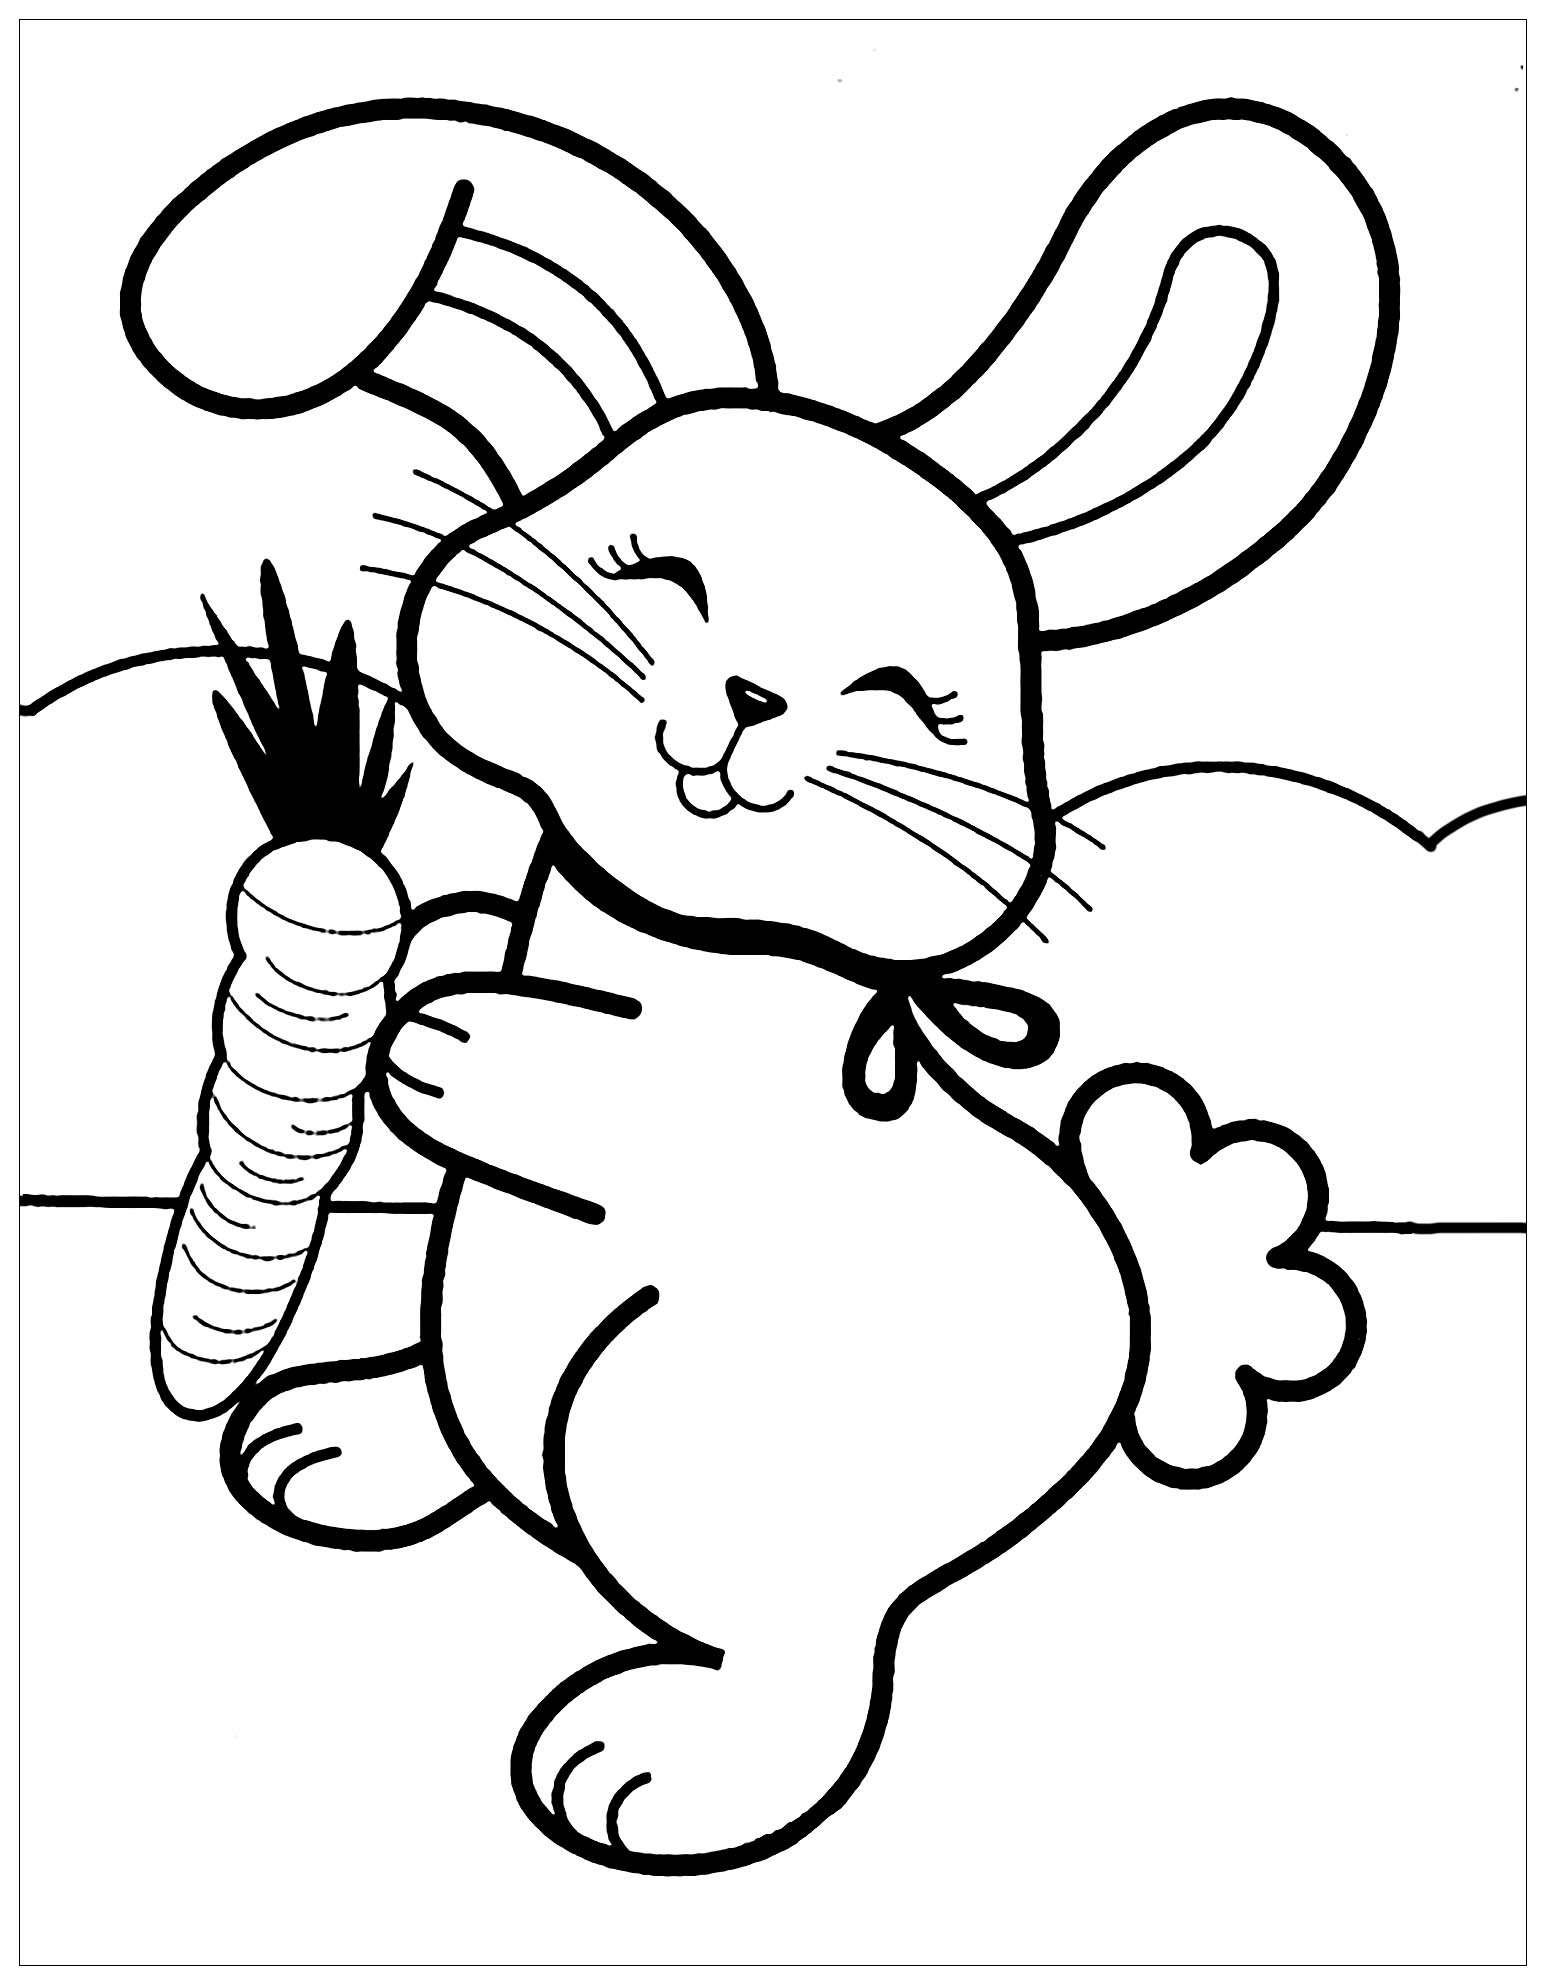 hopping bunny coloring pages